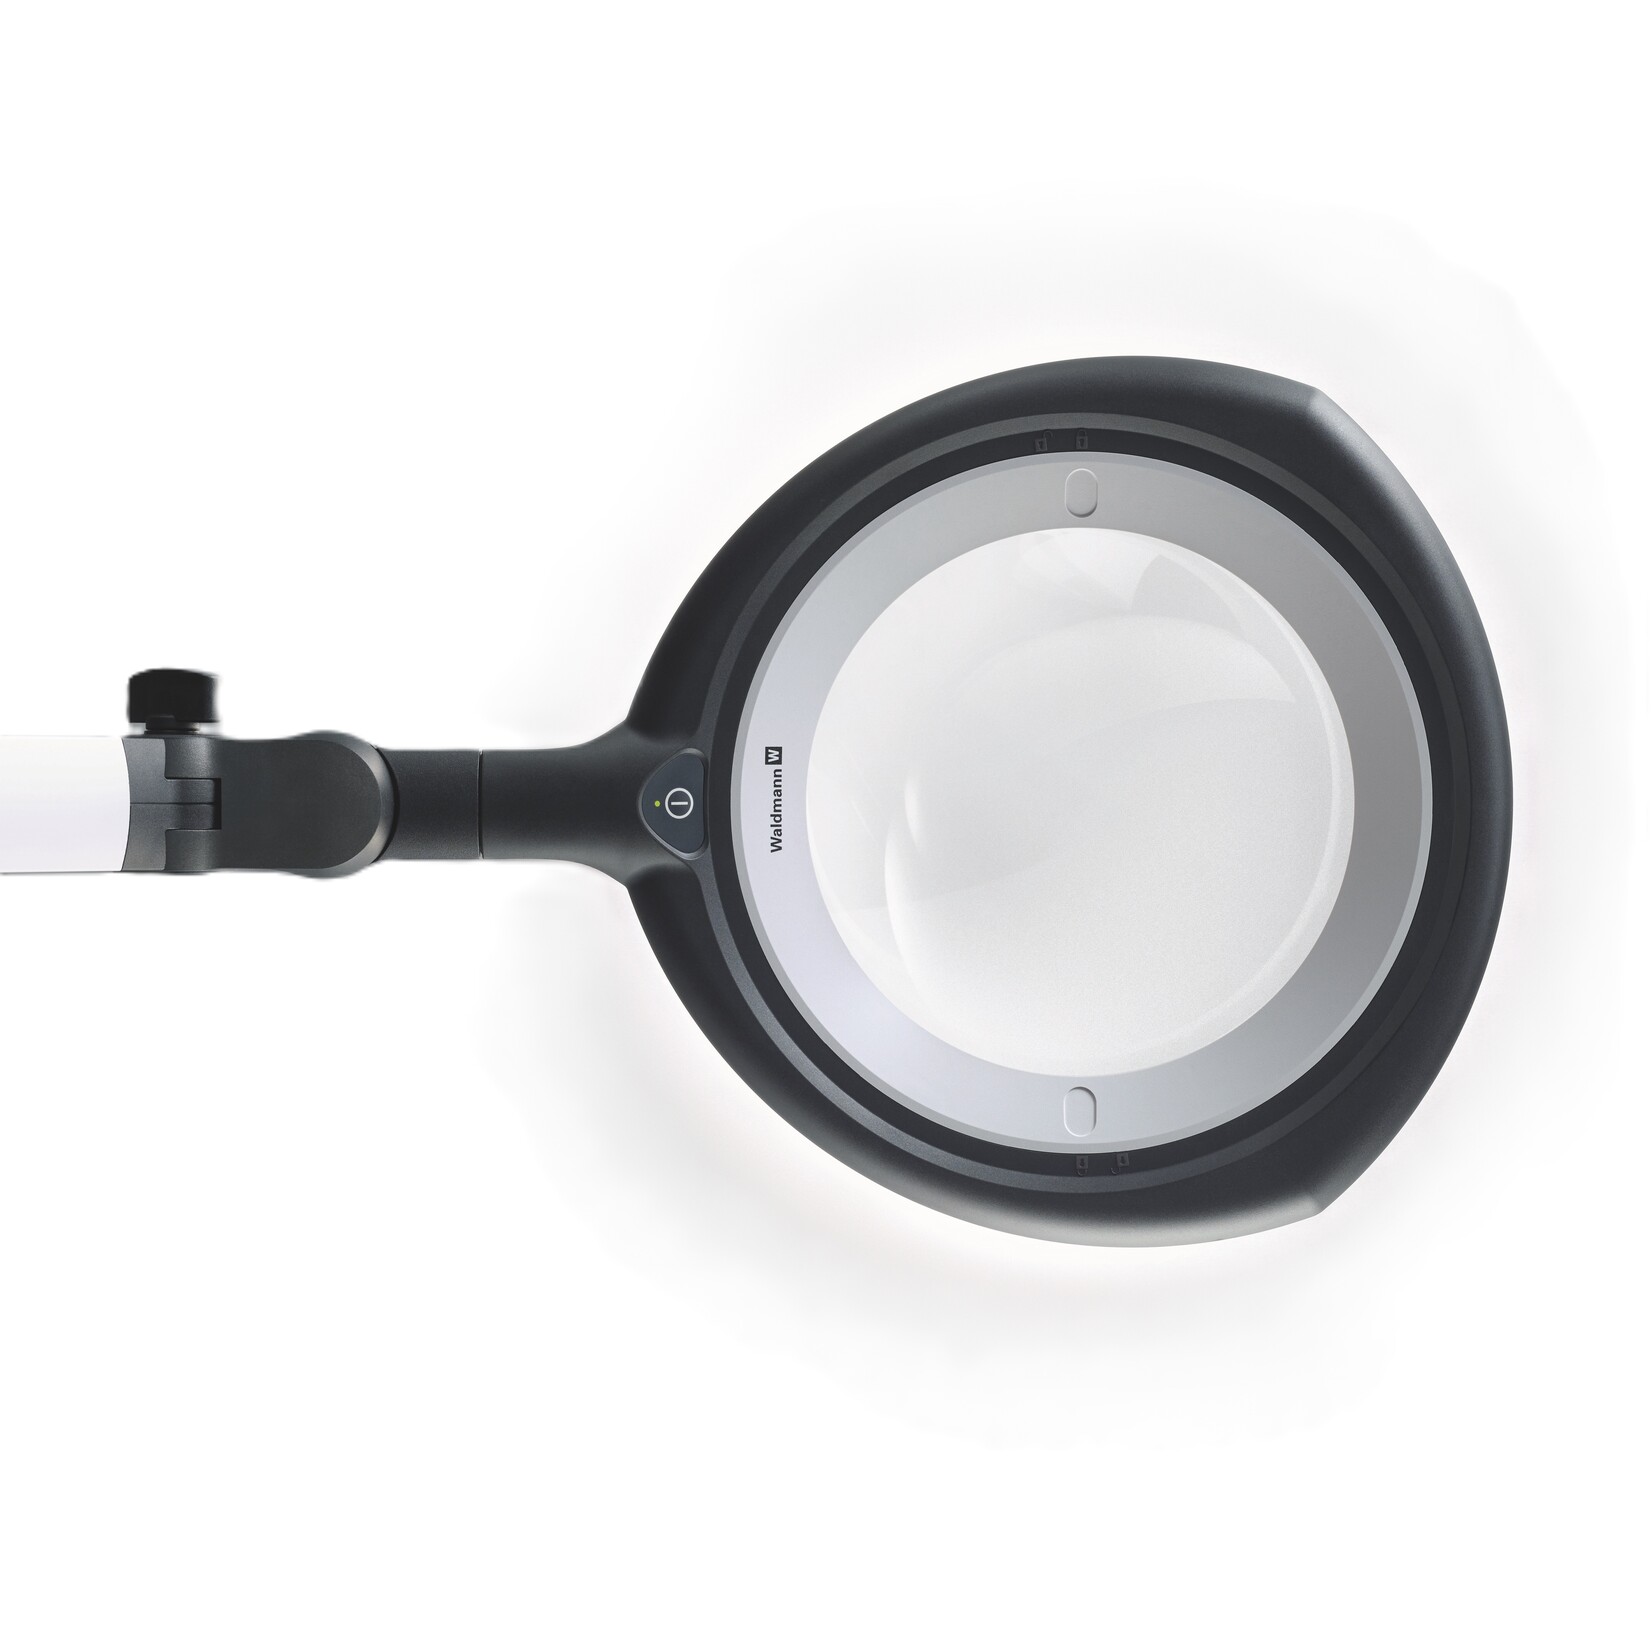 TEVISIO magnifying lamp with anti-reflective glass lens